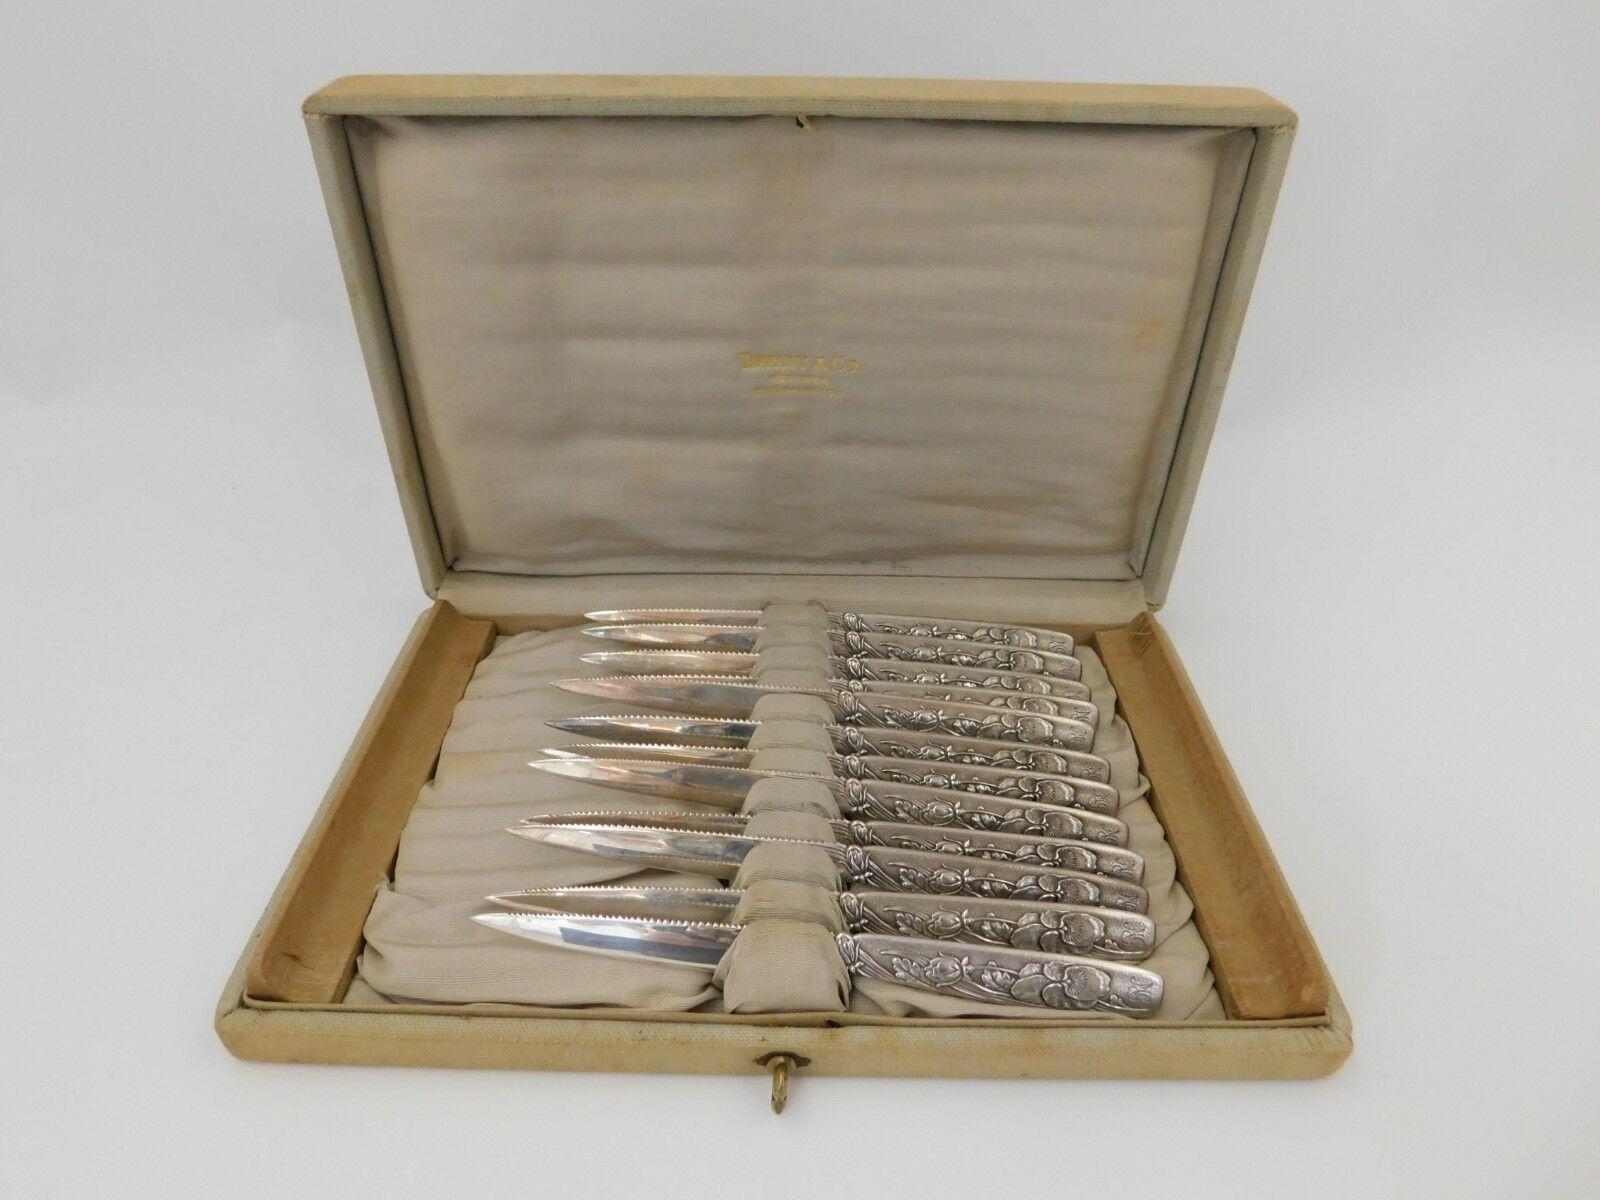 Vine by Tiffany & Co.

Remarkable sterling silver fruit knife set - 12 pieces measuring 6 1/2